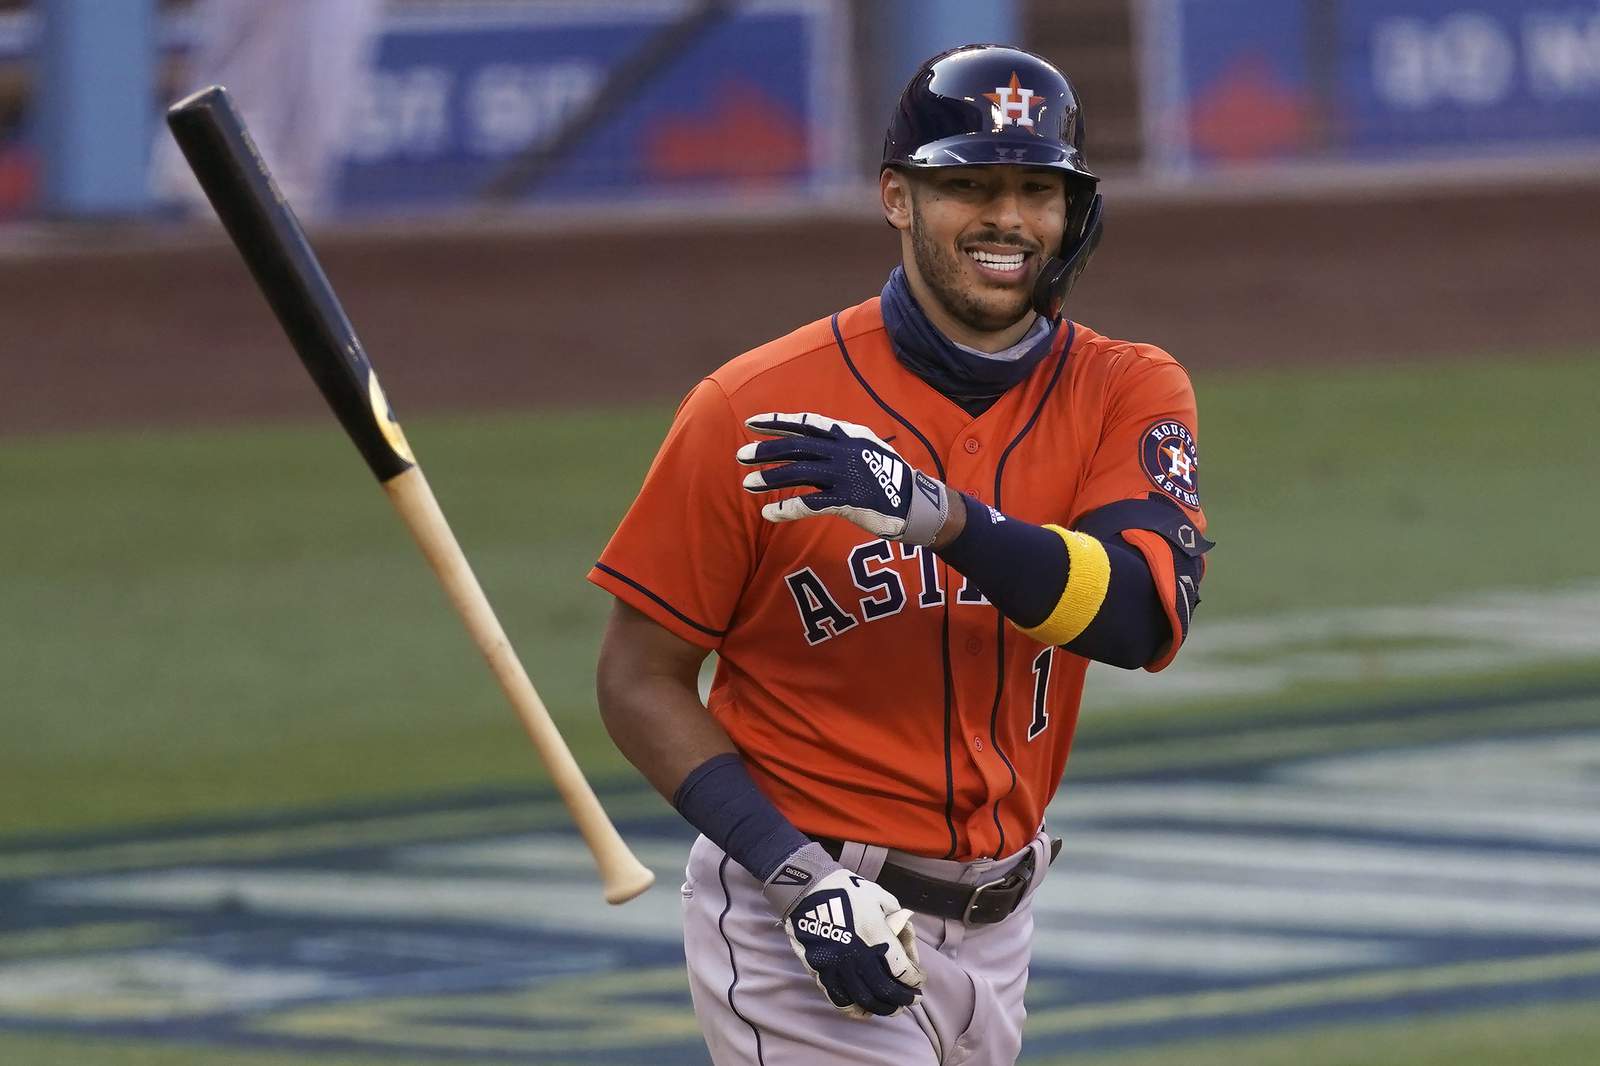 Astros star Carlos Correa says he’s planning for free agency, sends social media into frenzy